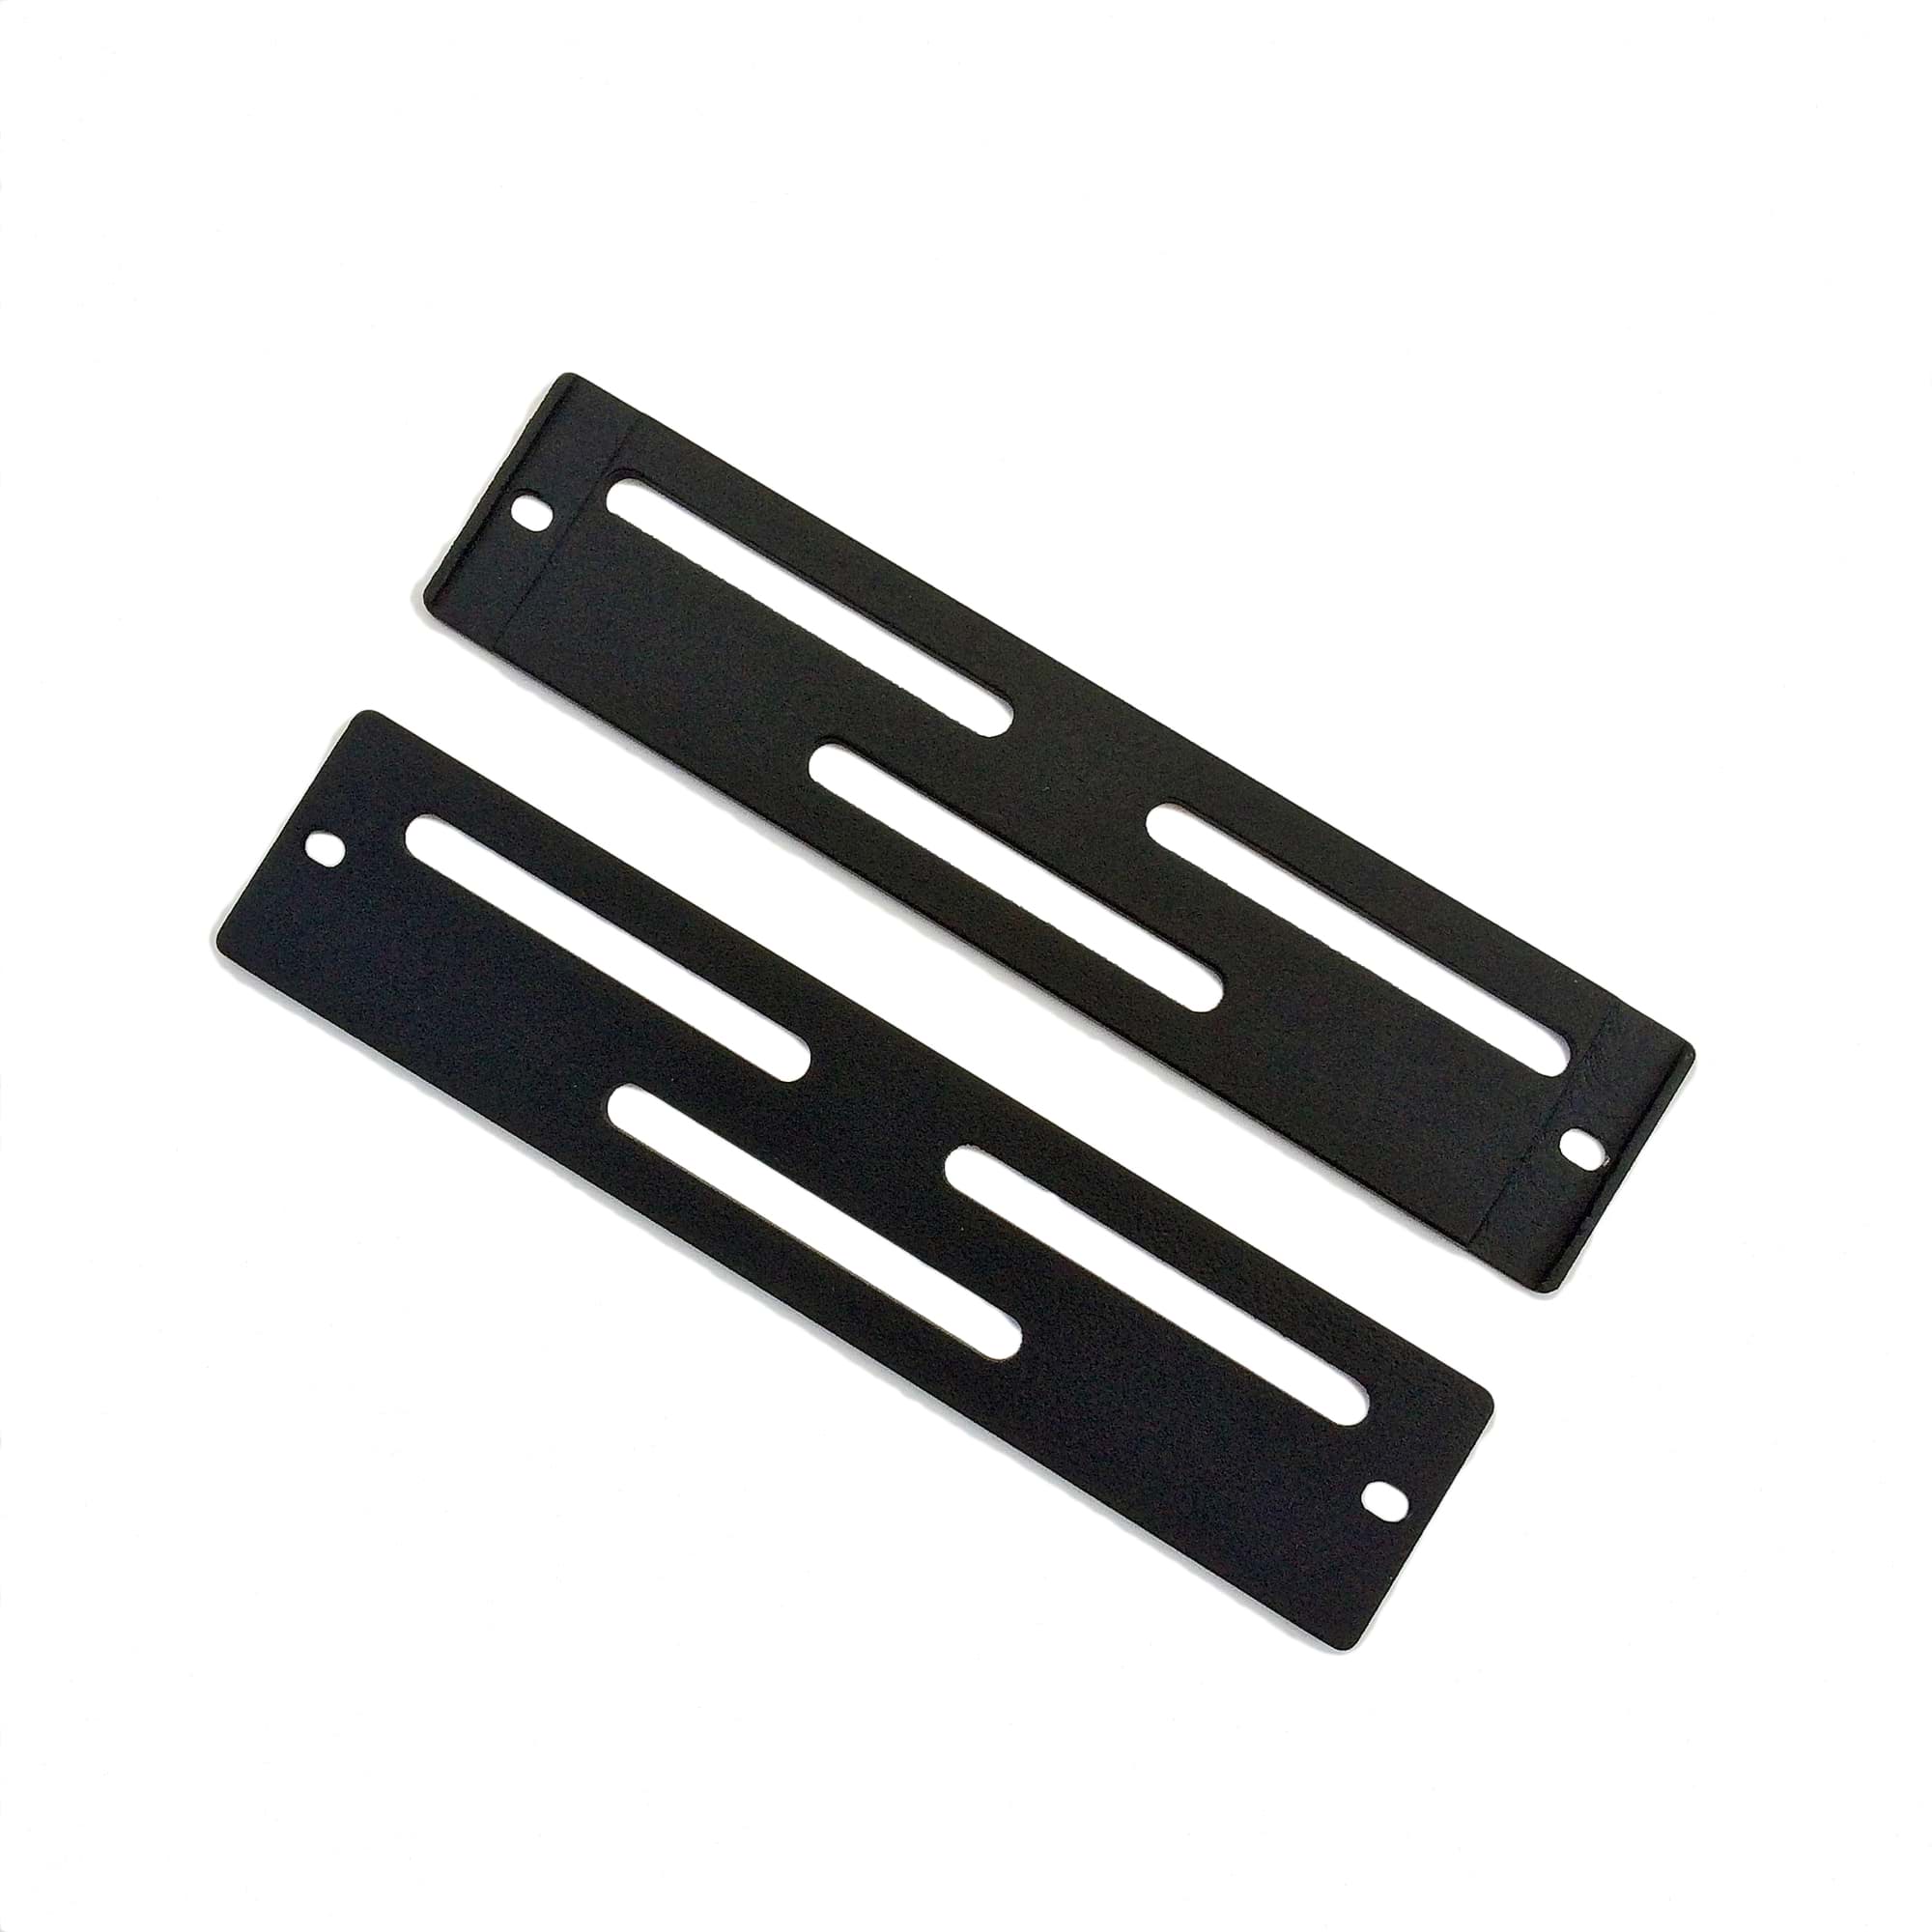 Picture of Straight brackets for norrowing Aquatic Life hybrid fixture to 406,4mm / 16"